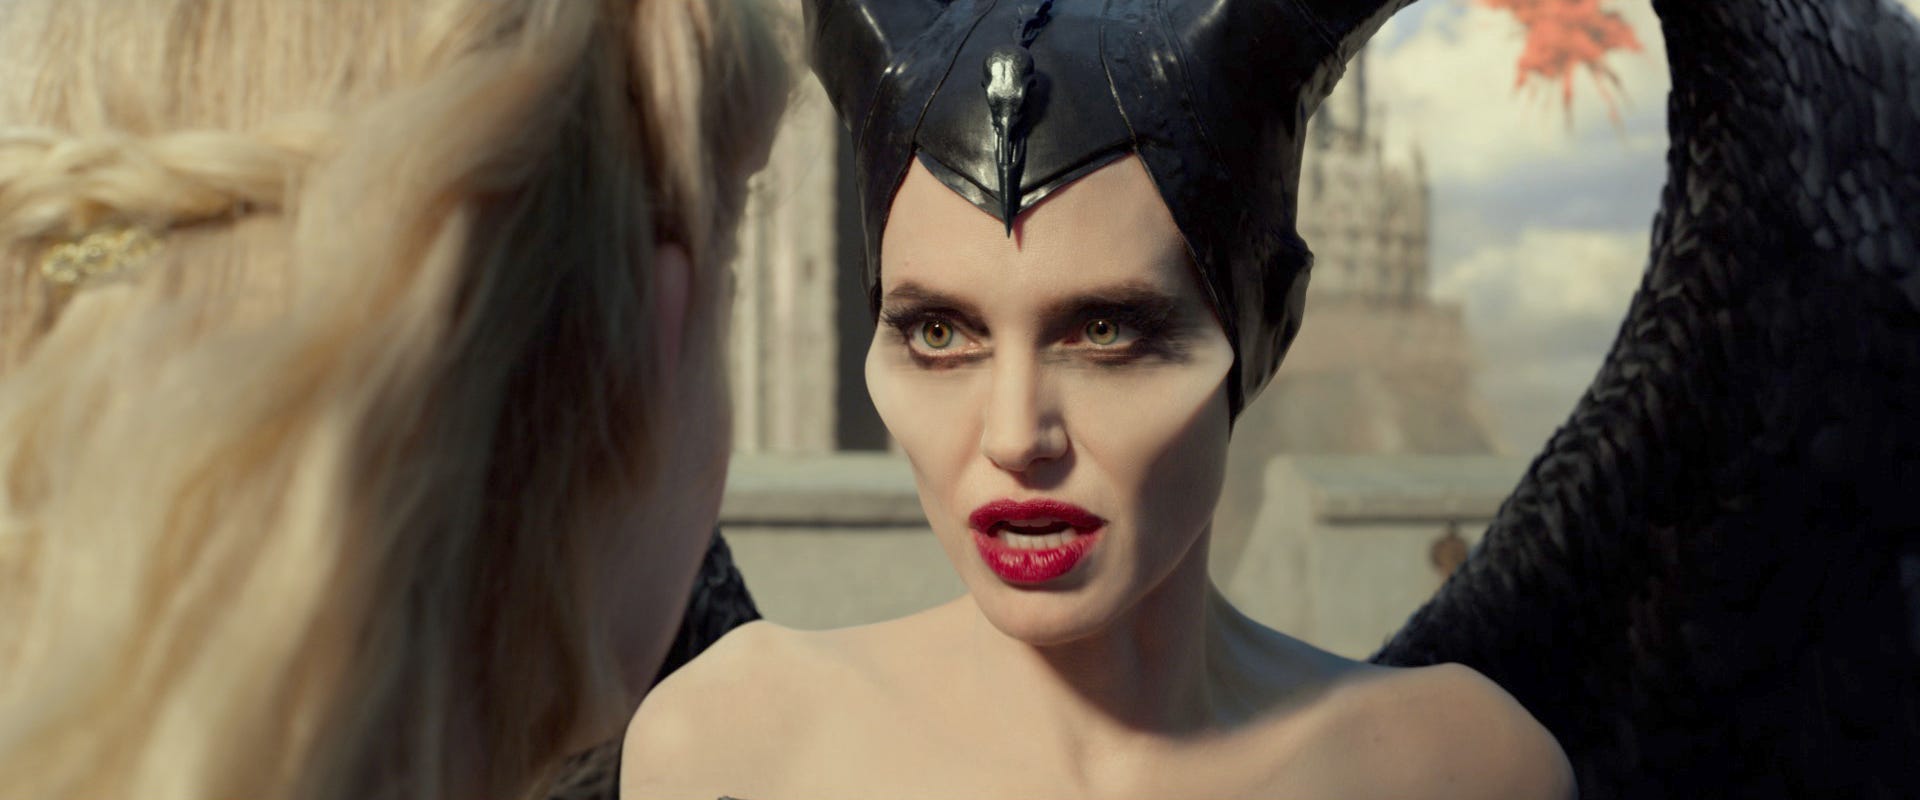 Elle Fanning As Maleficent Cosplay with Angelina Jolie Wallpapers